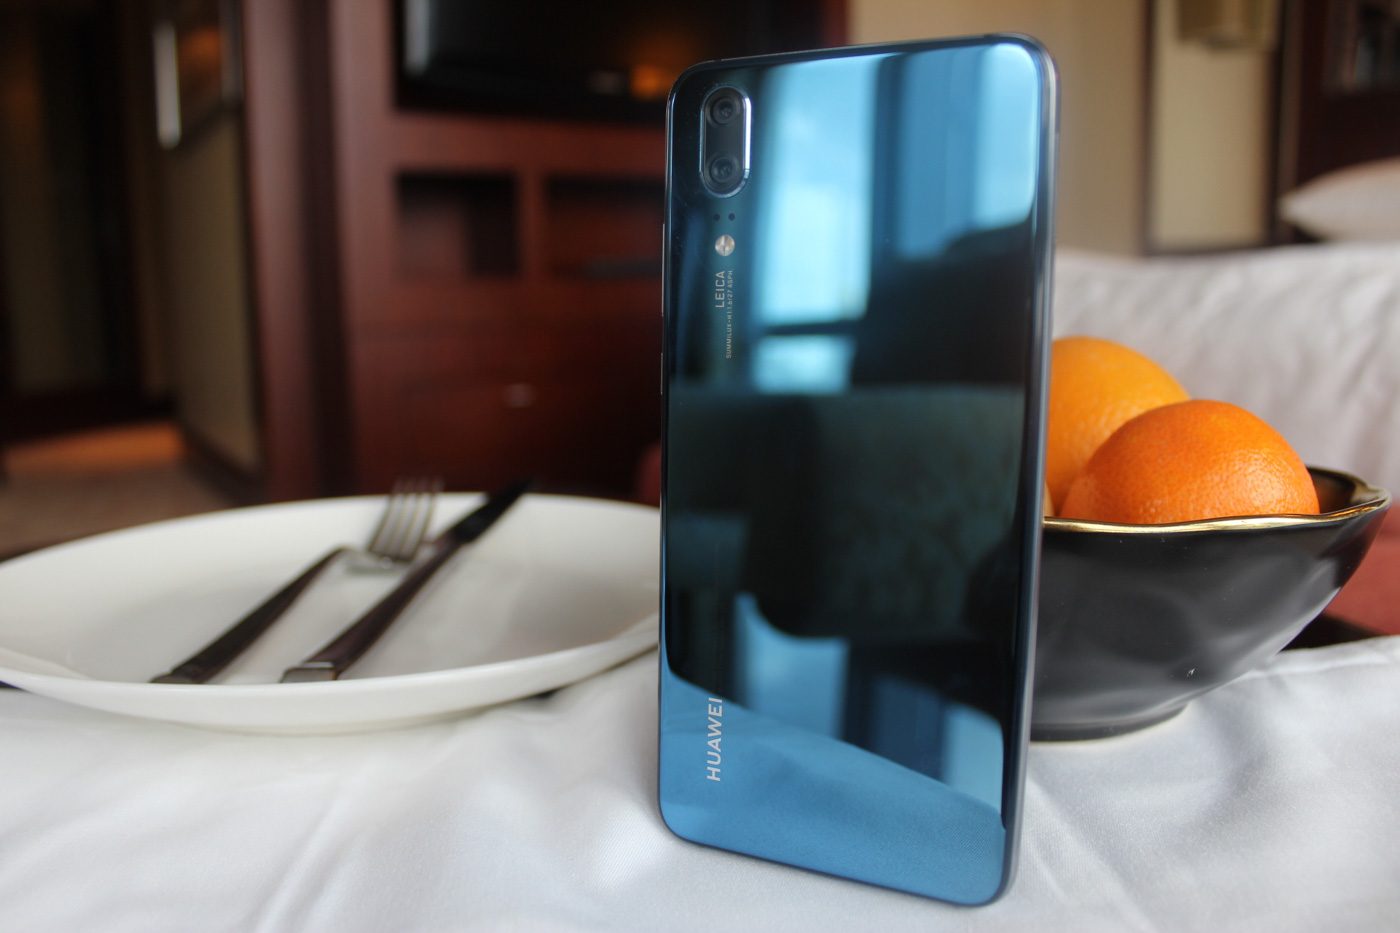 Huawei P20 review: Holding its own with stellar cameras